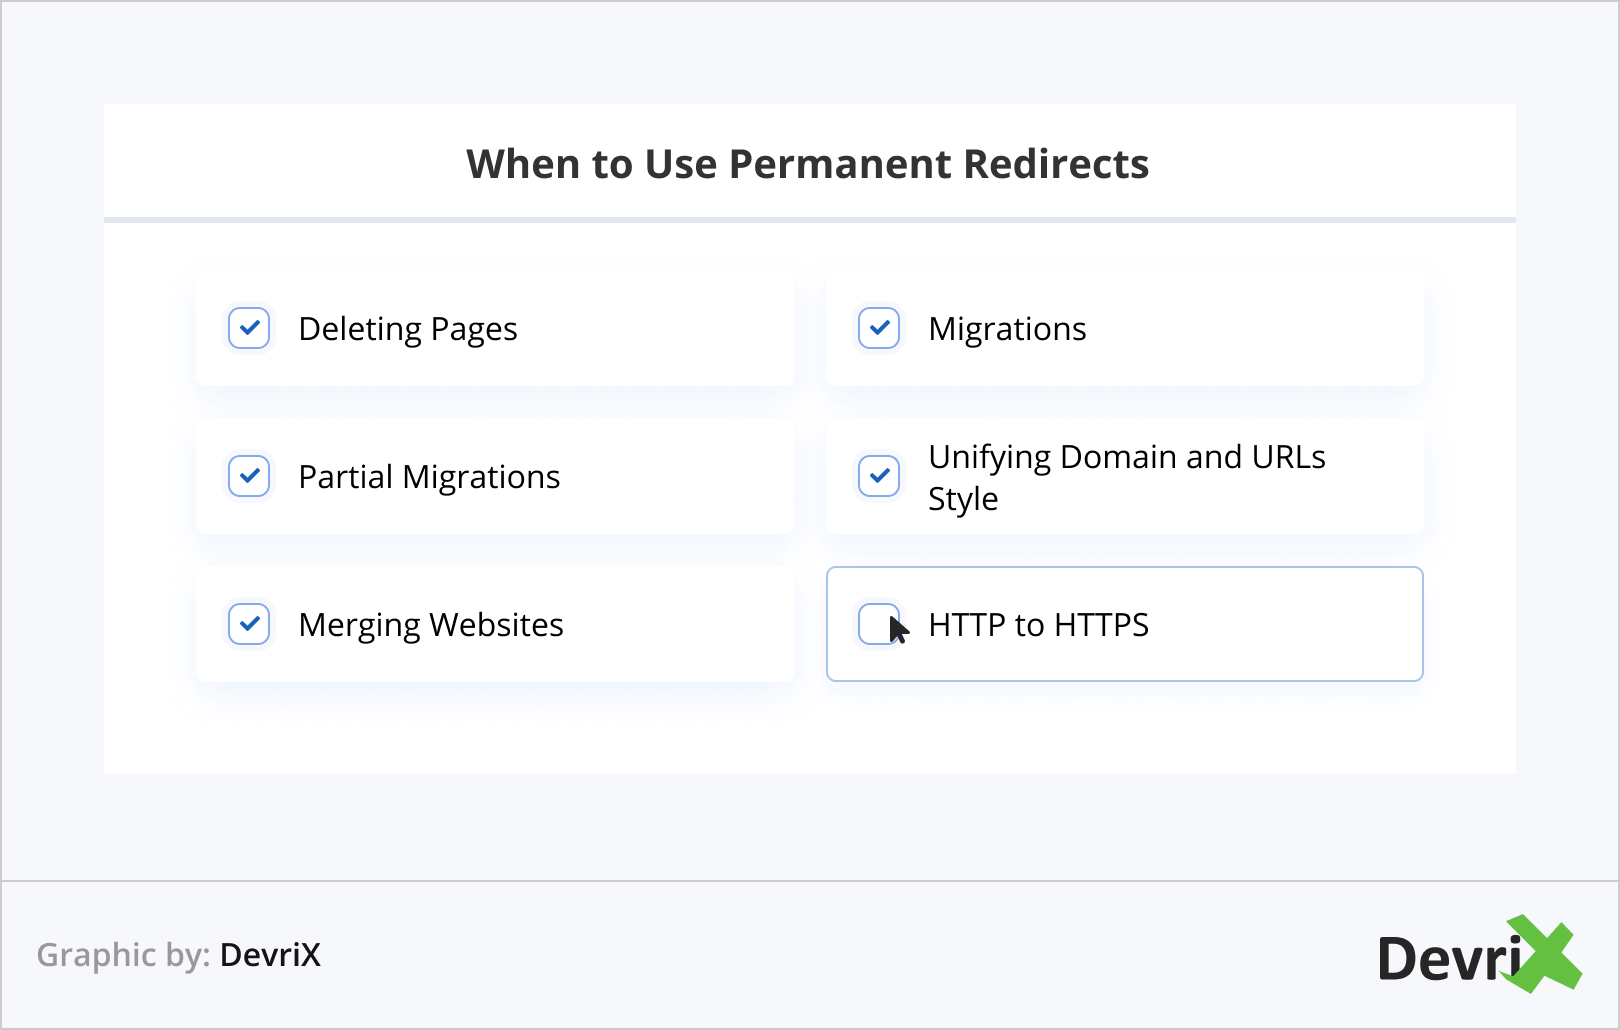 When to Use Permanent Redirects